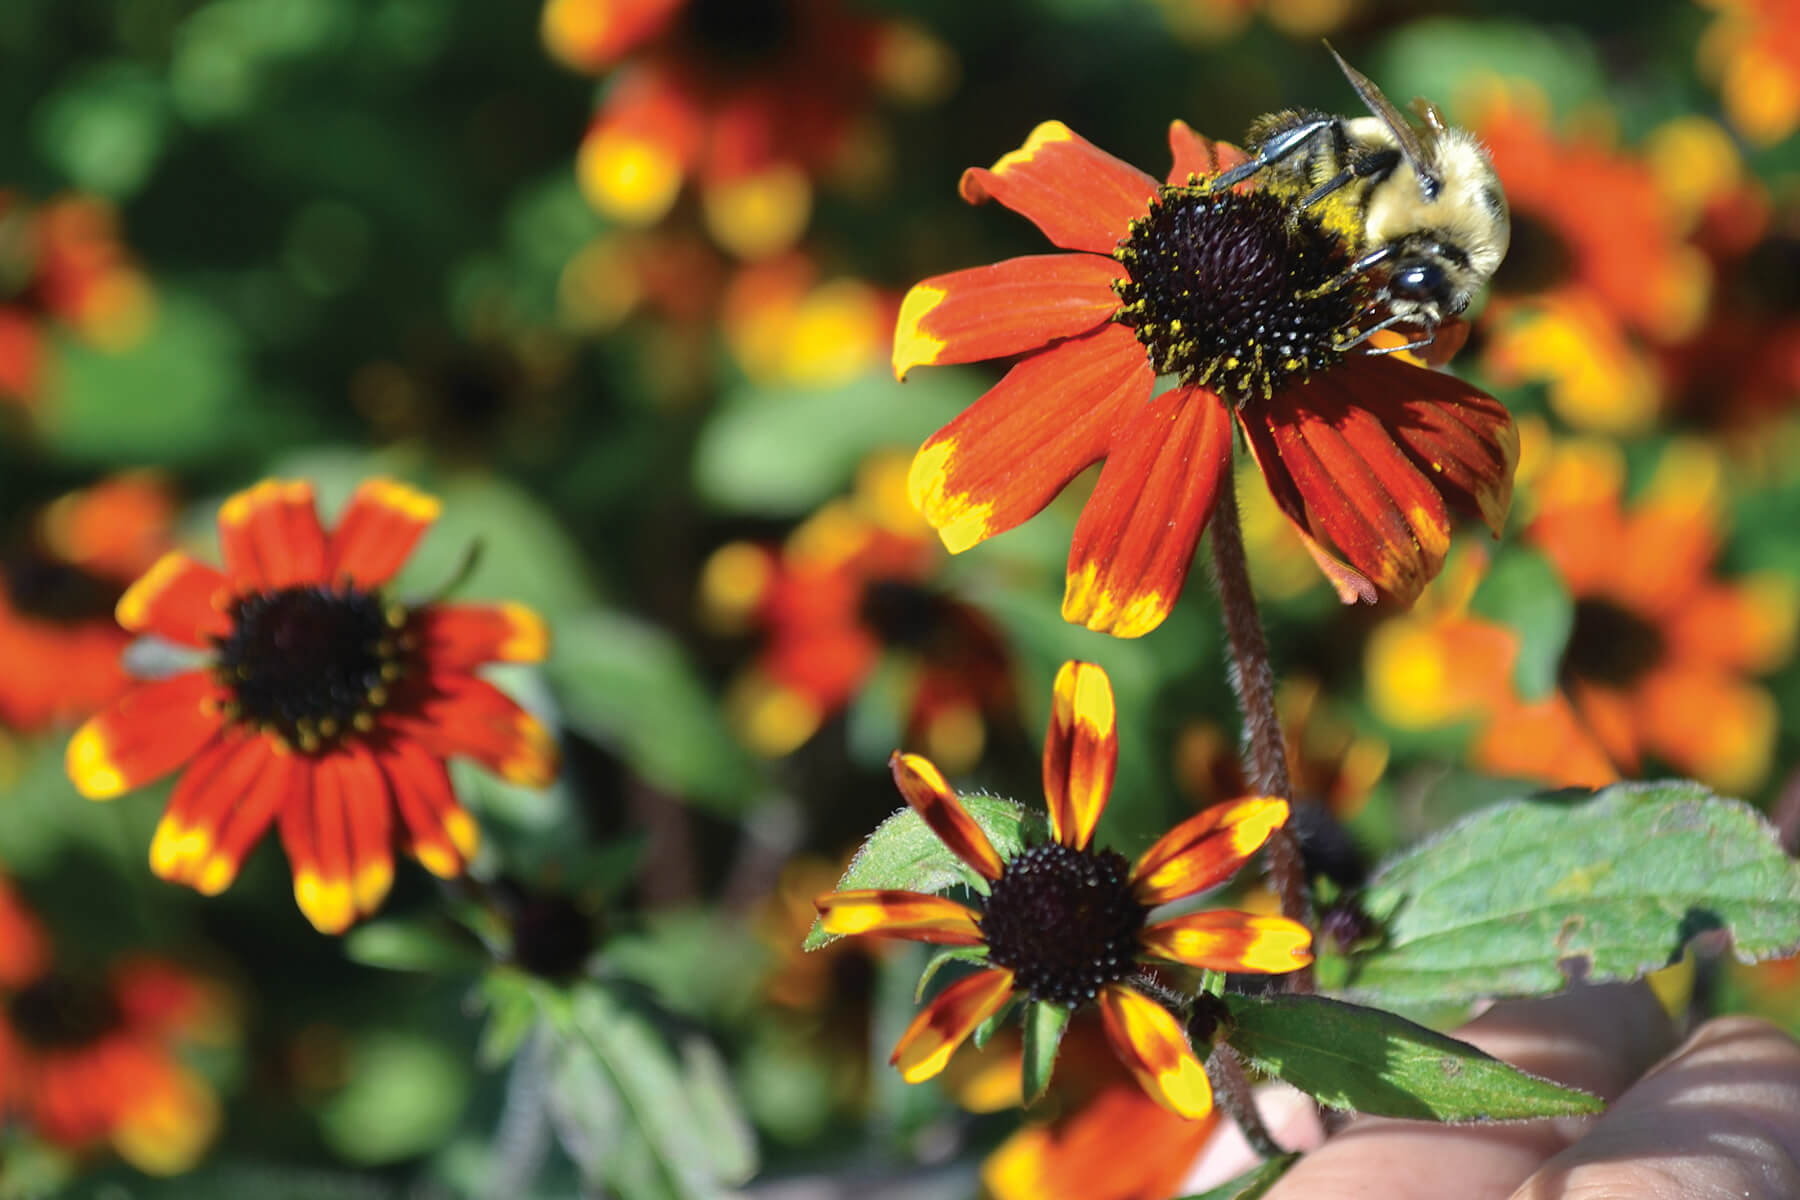 black centred cone flower with reddish petals that have yellow tips